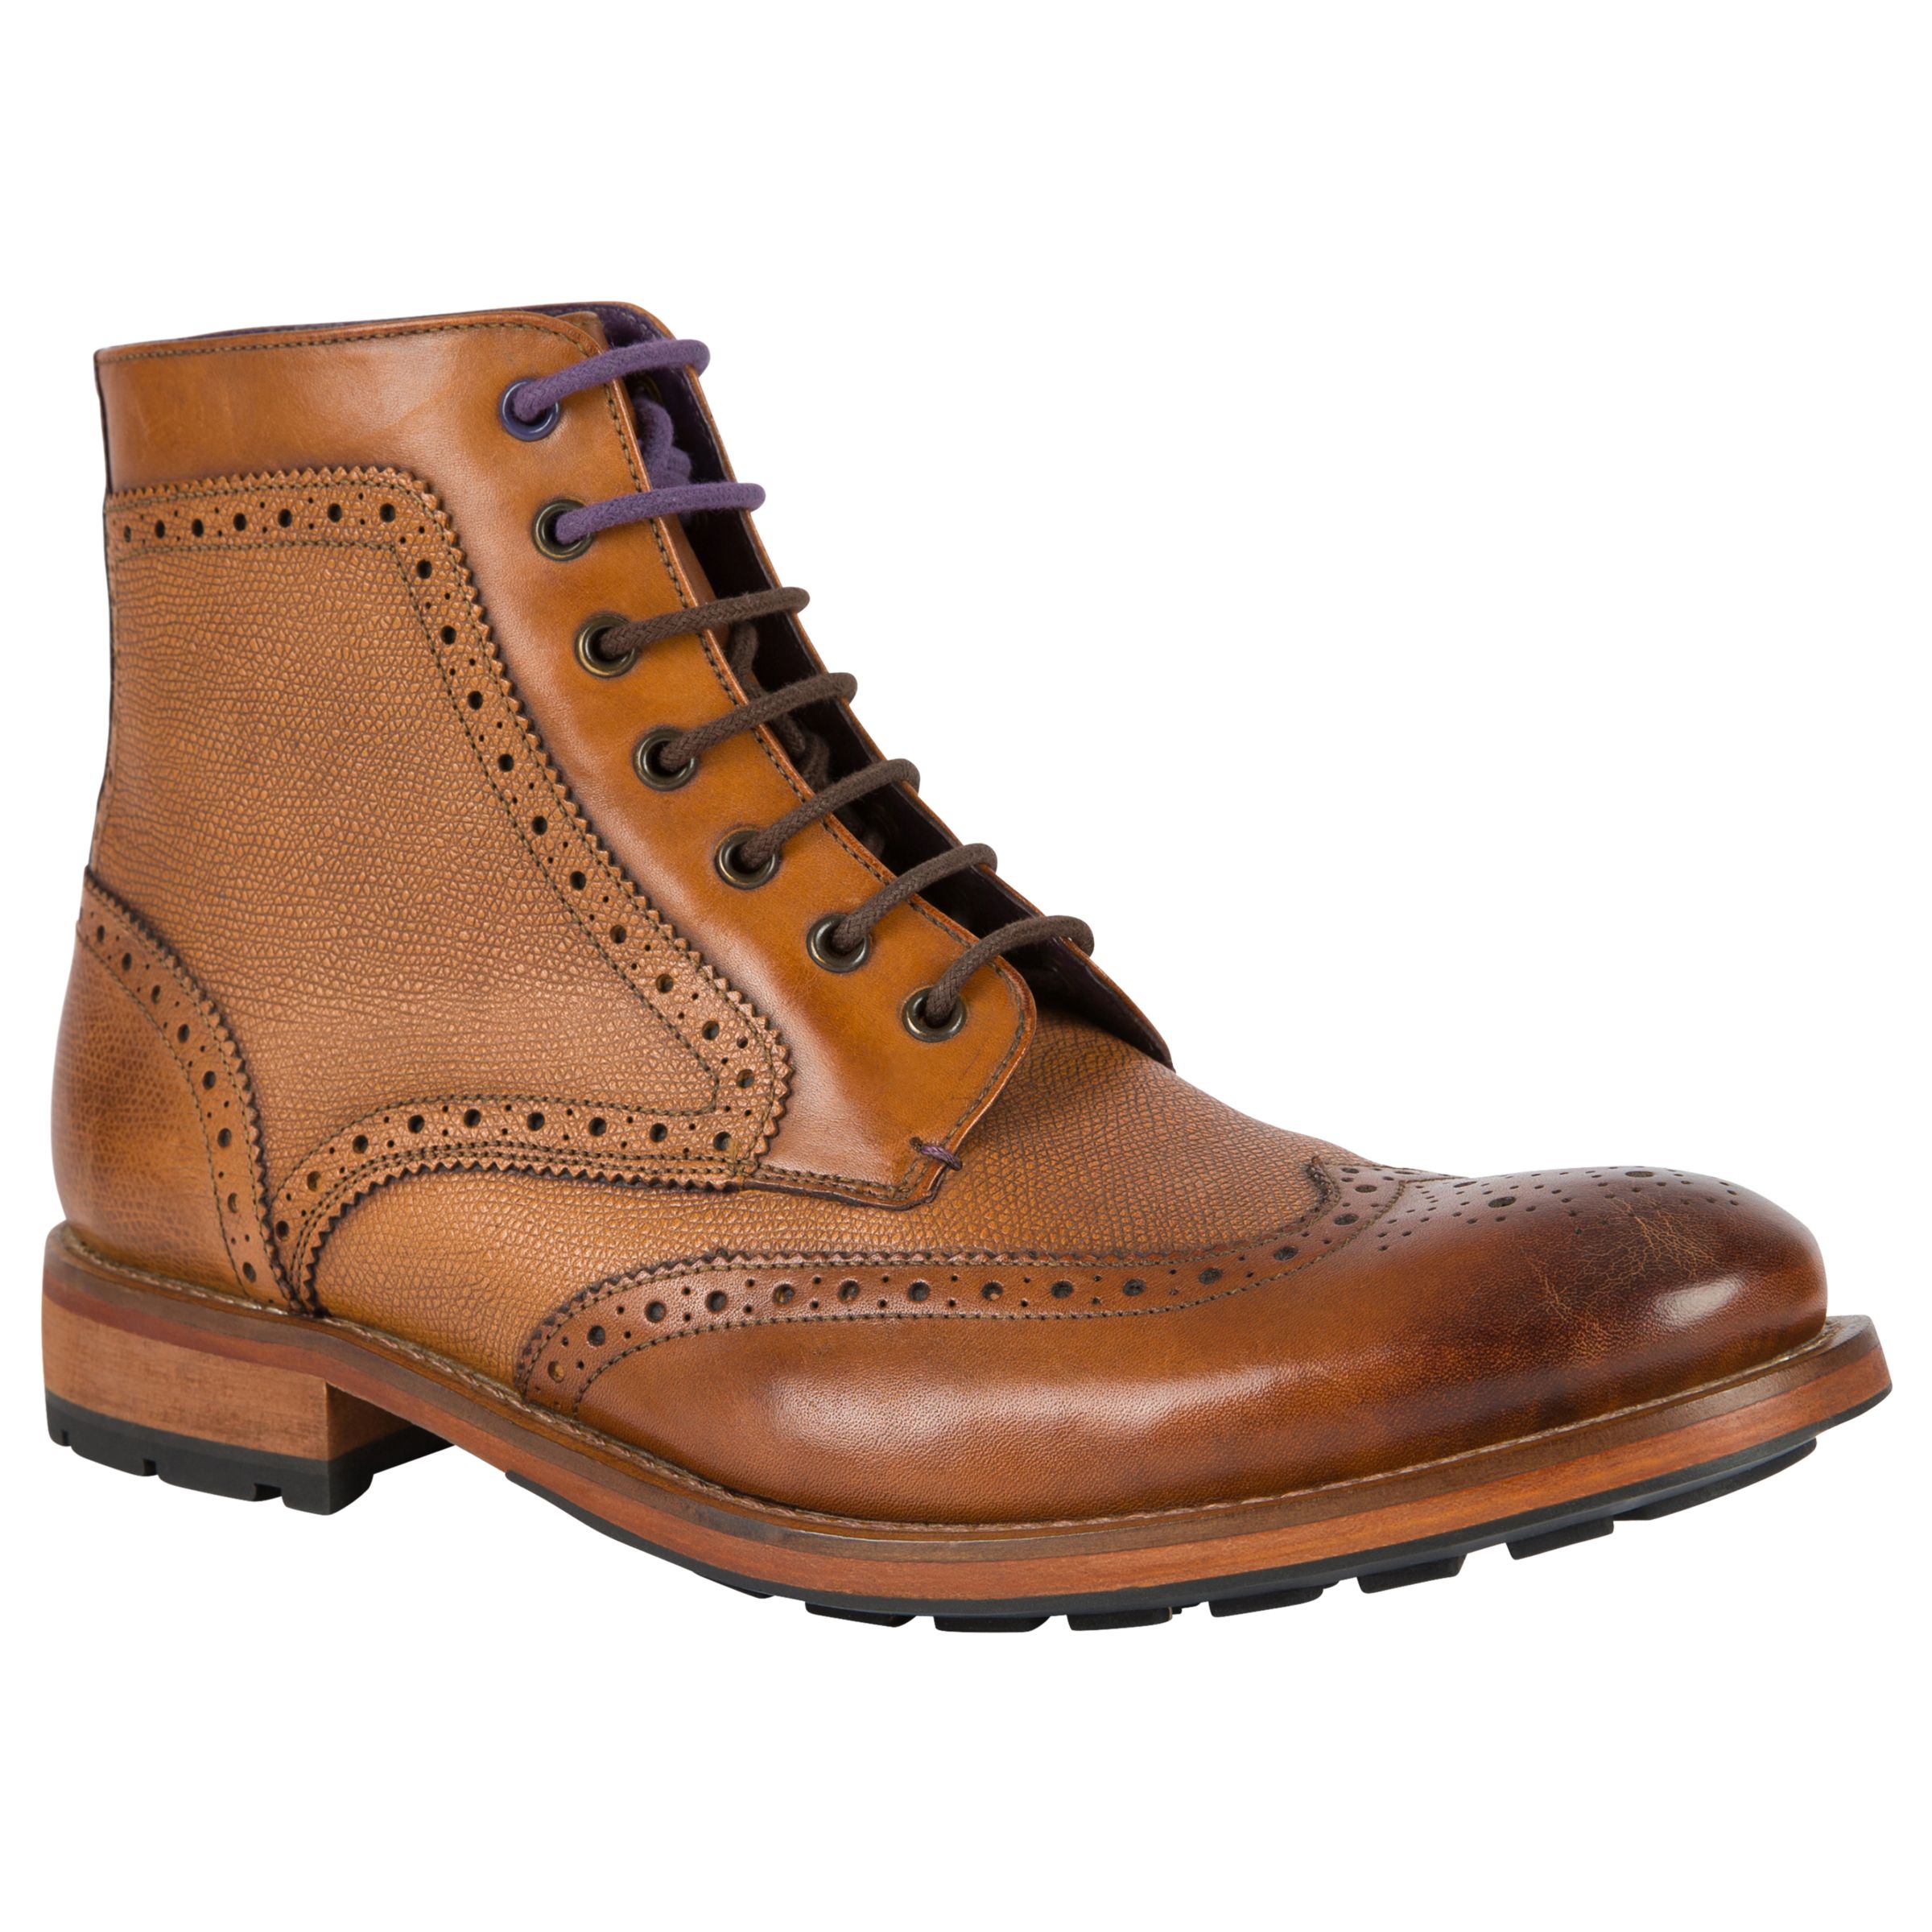 Ted Baker Sealls 3 Leather Brogue Boots, Tan